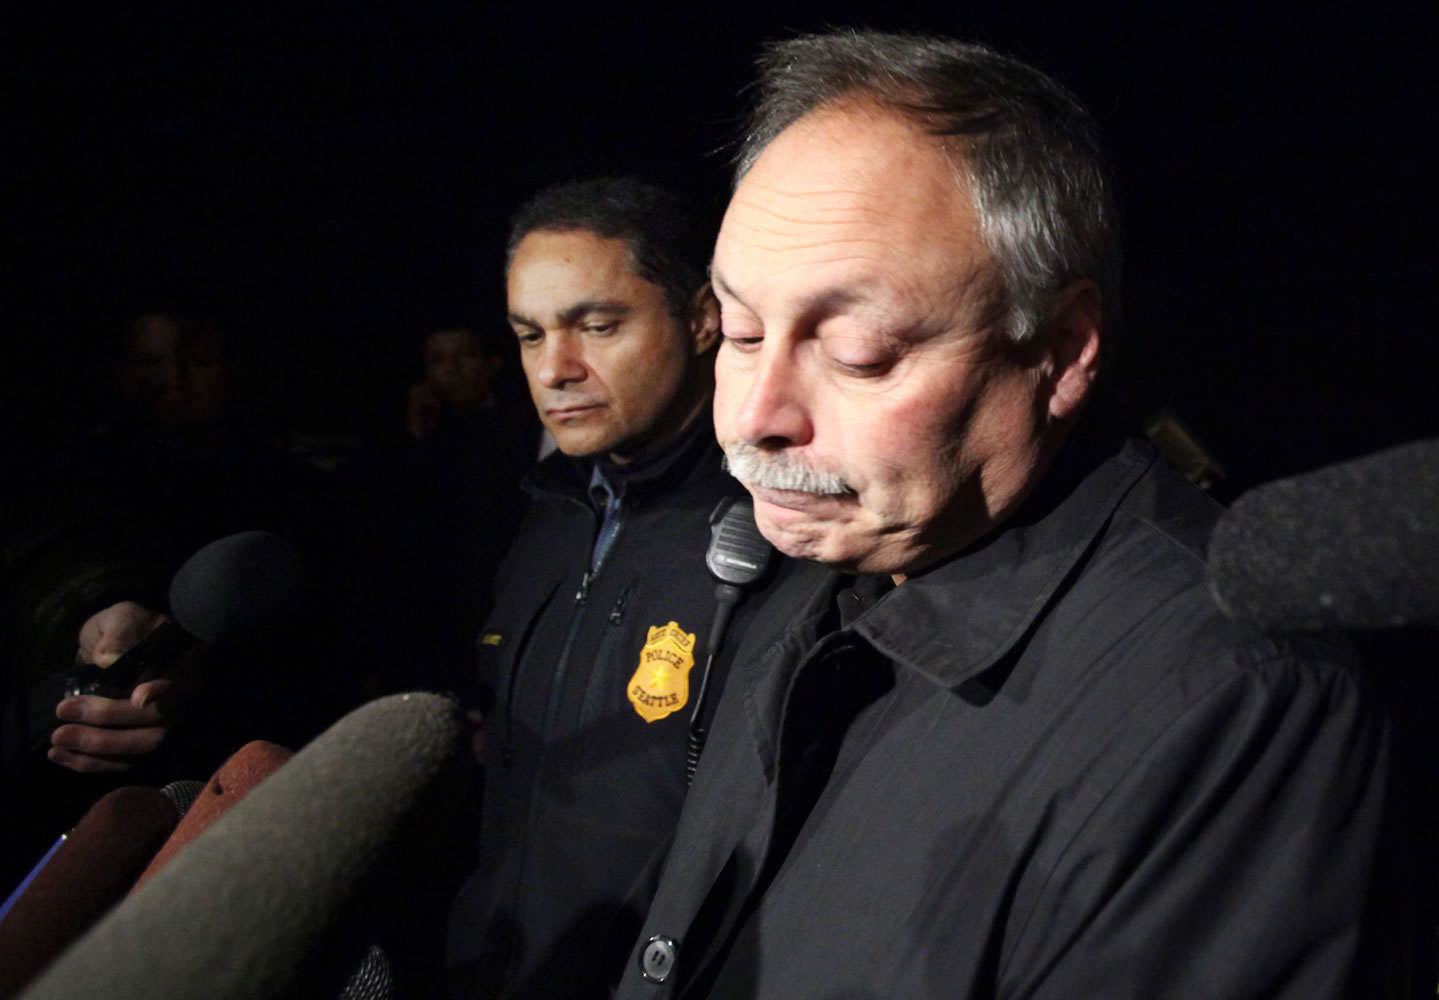 Seattle Police chief John Diaz, right, during a news briefing with assistant chief Nick Metz, left, in Seattle.